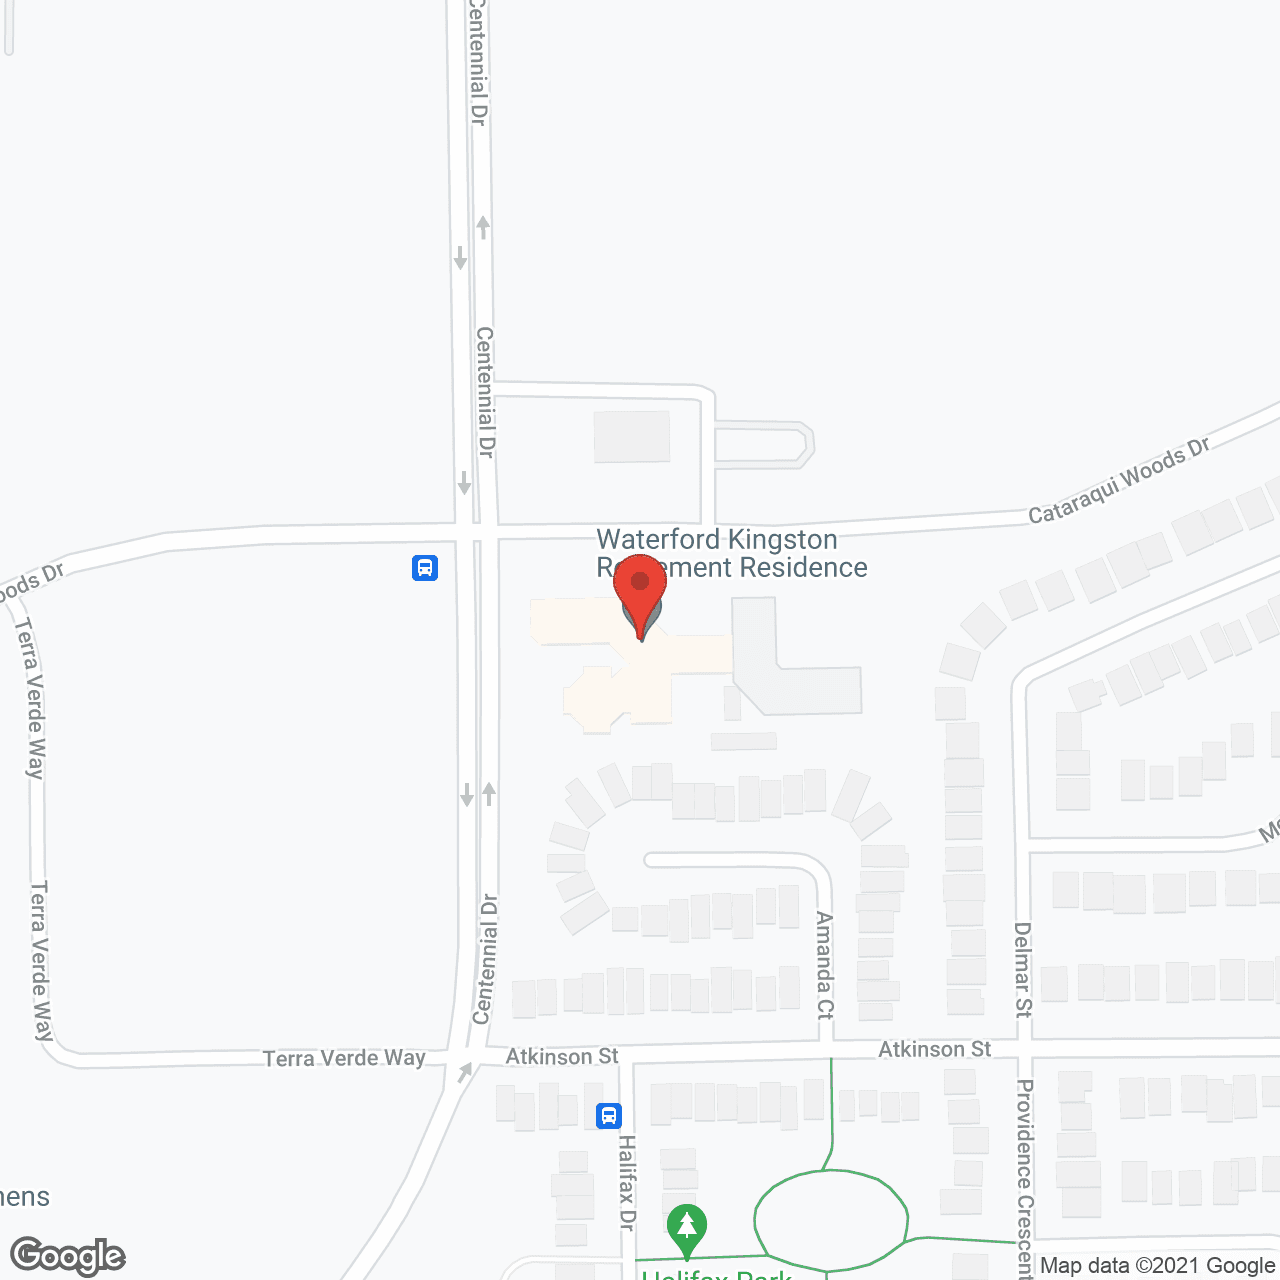 The Waterford Retirement Community-Kingston in google map